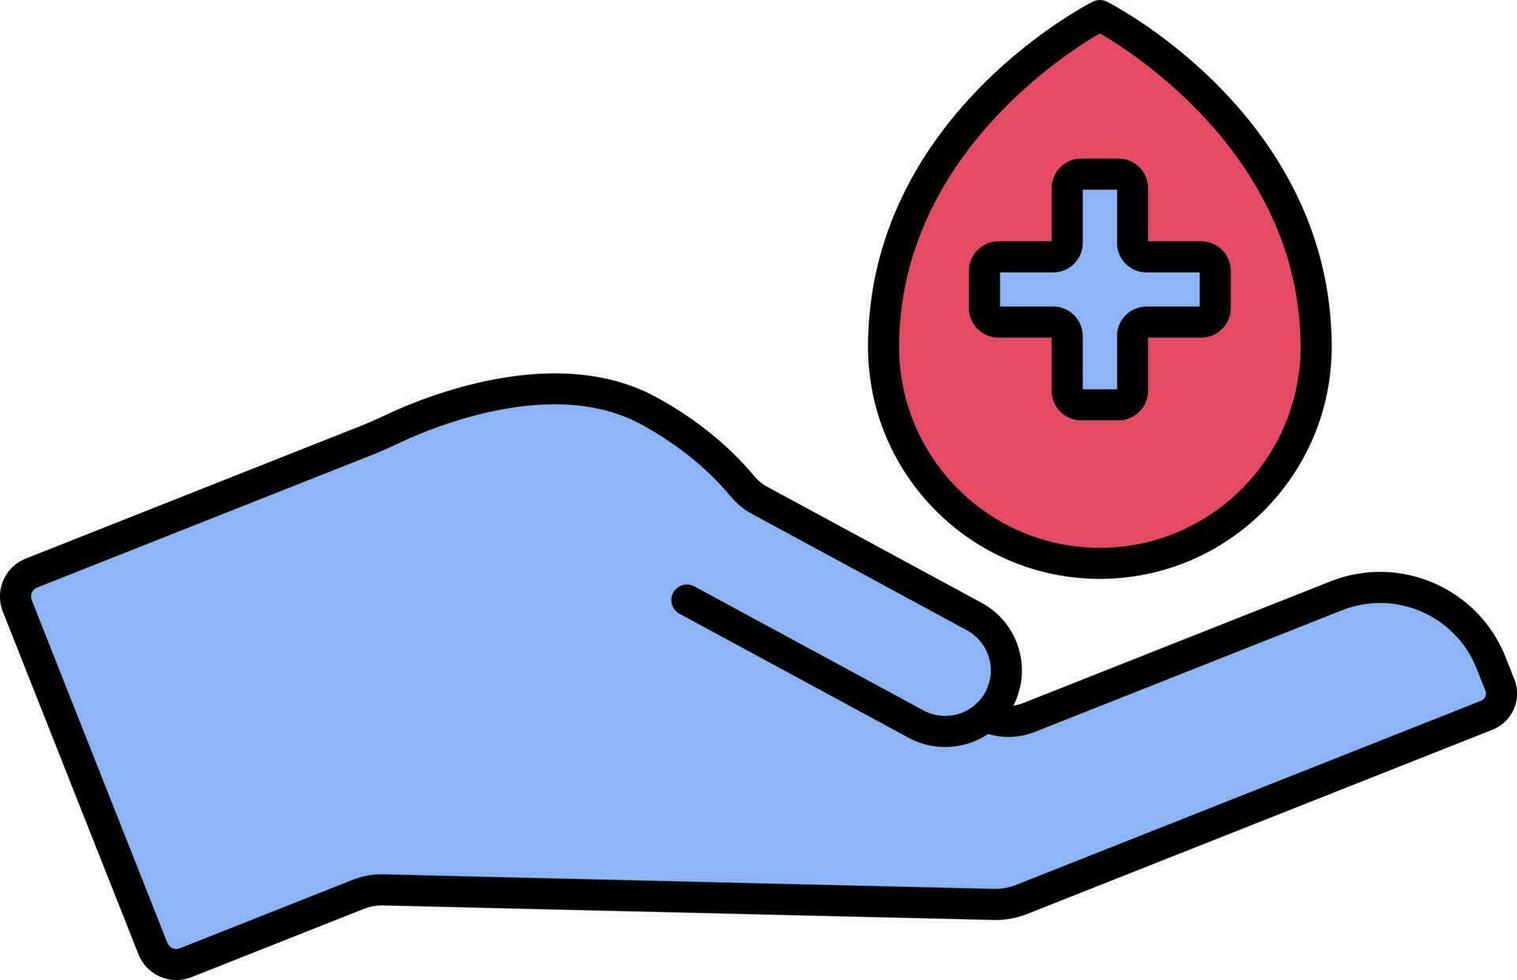 Hand With Blood Drop Icon In Blue And Pink Color. vector